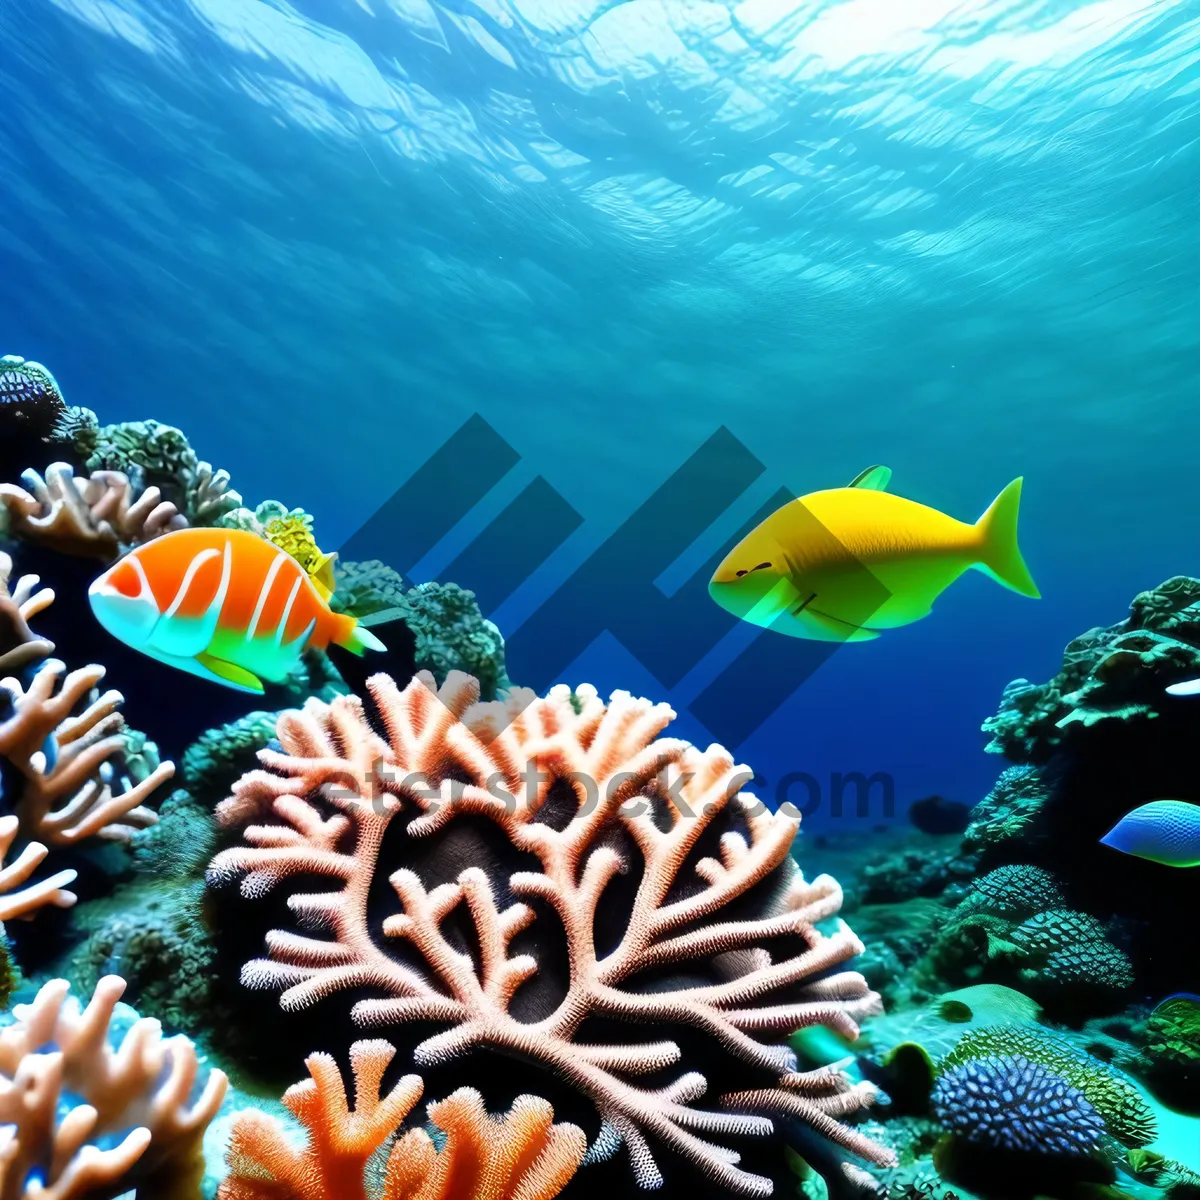 Picture of Vibrant Tropical Coral Reef Teeming with Marine Life